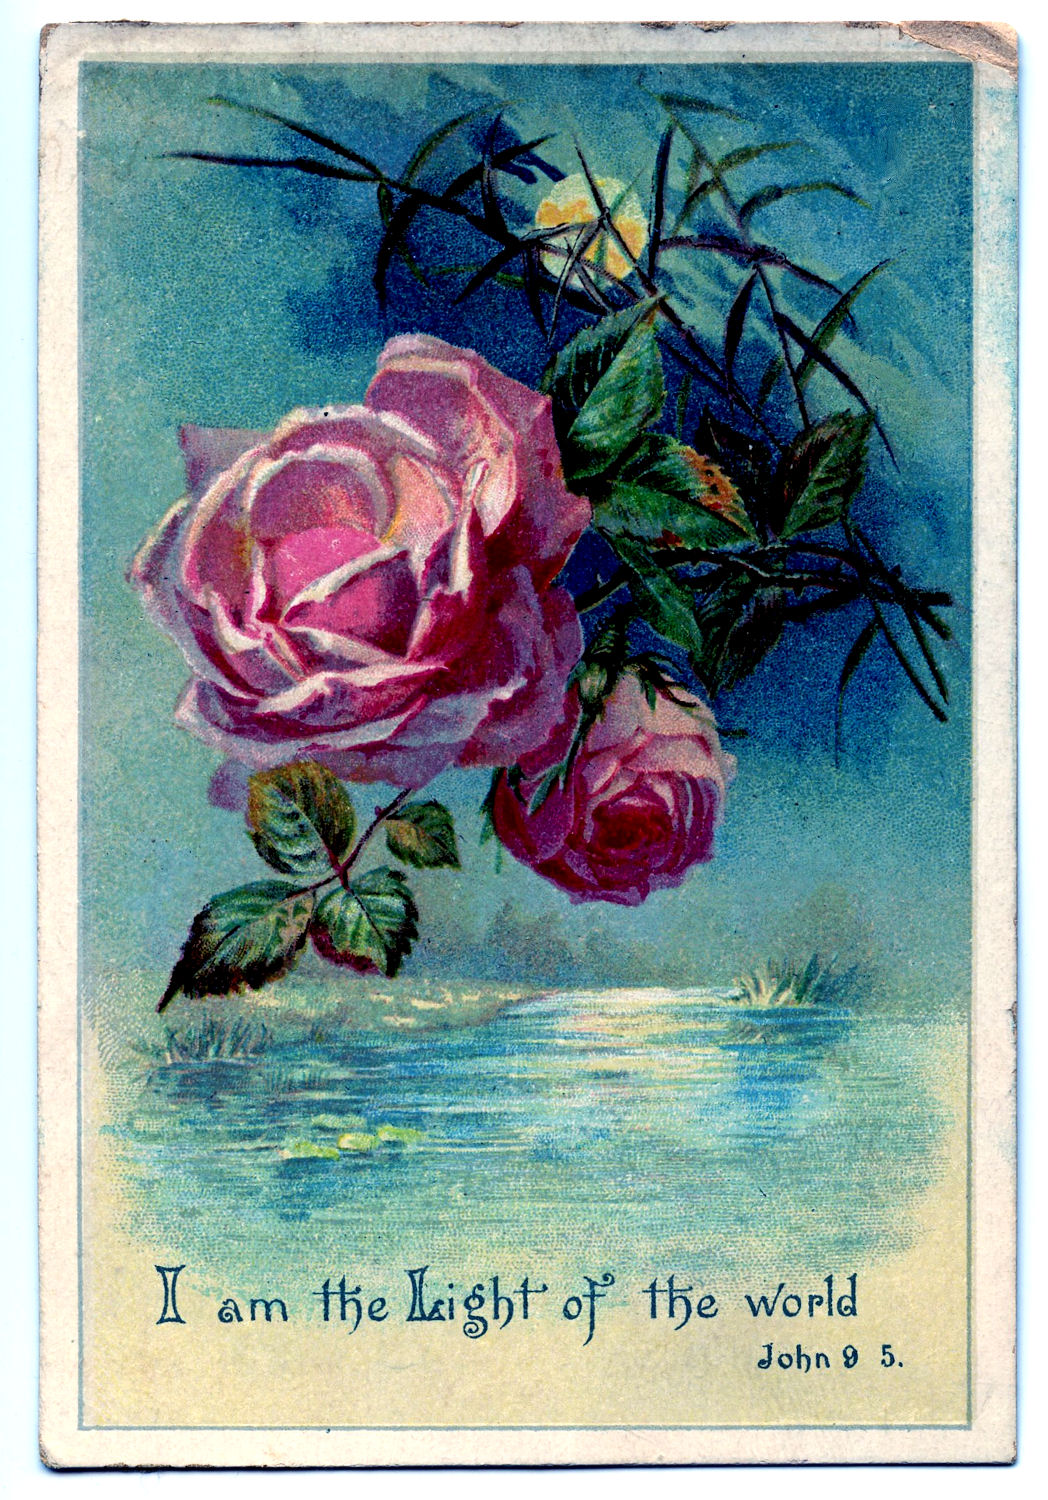 Vintage Clip Art - Moonlight and Roses #2 - The Graphics Fairy